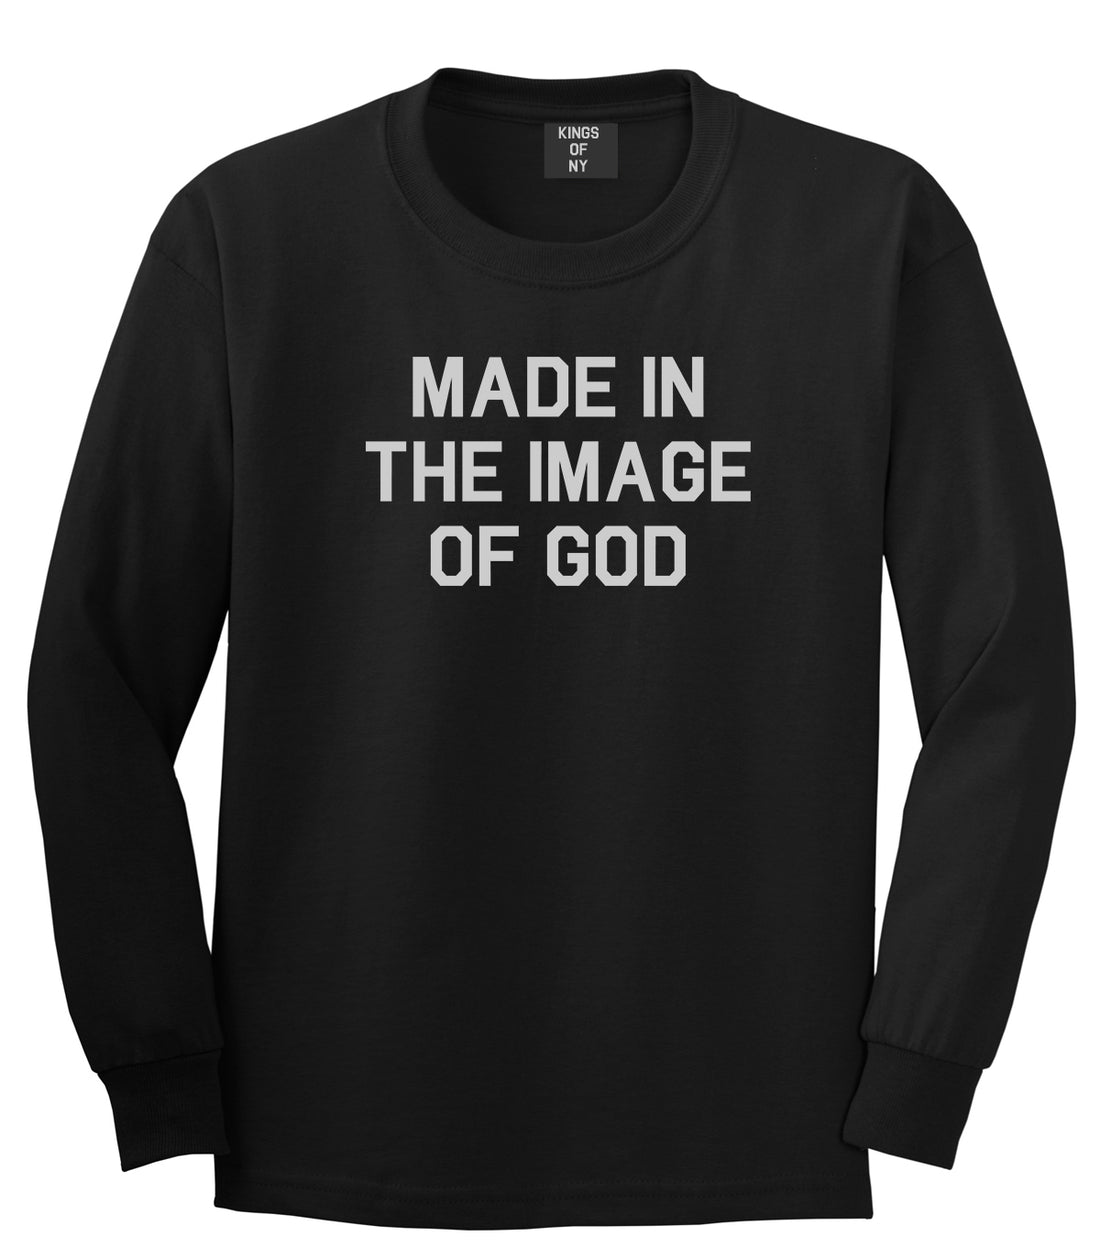 Made In The Image Of God Mens Long Sleeve T-Shirt Black by Kings Of NY